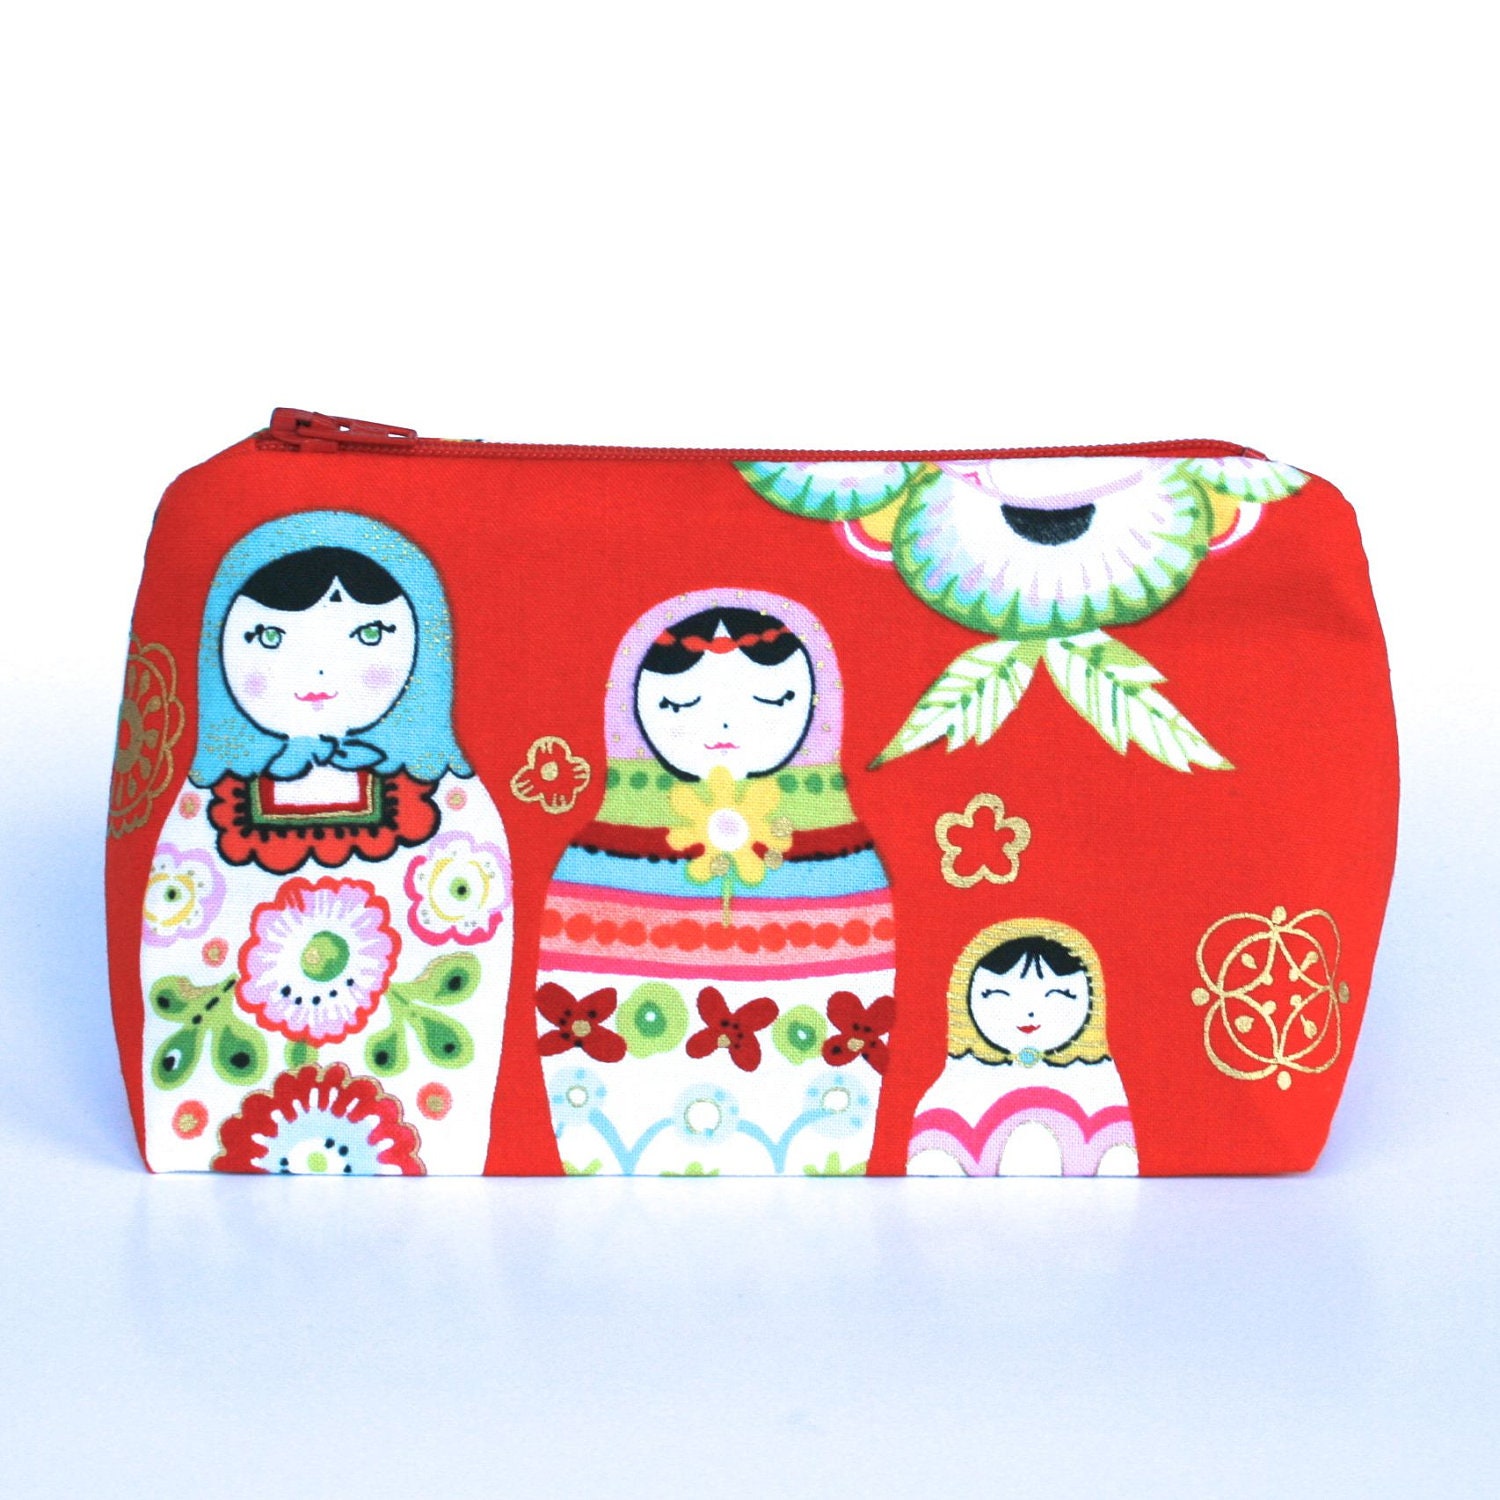 Red Makeup Bag in Matryoshka Russian Doll Cotton - Cosmetic Bag: Bridesmaid Gift, Birthday Gift, Indie Stocking Stuffer, Indie Gift for her